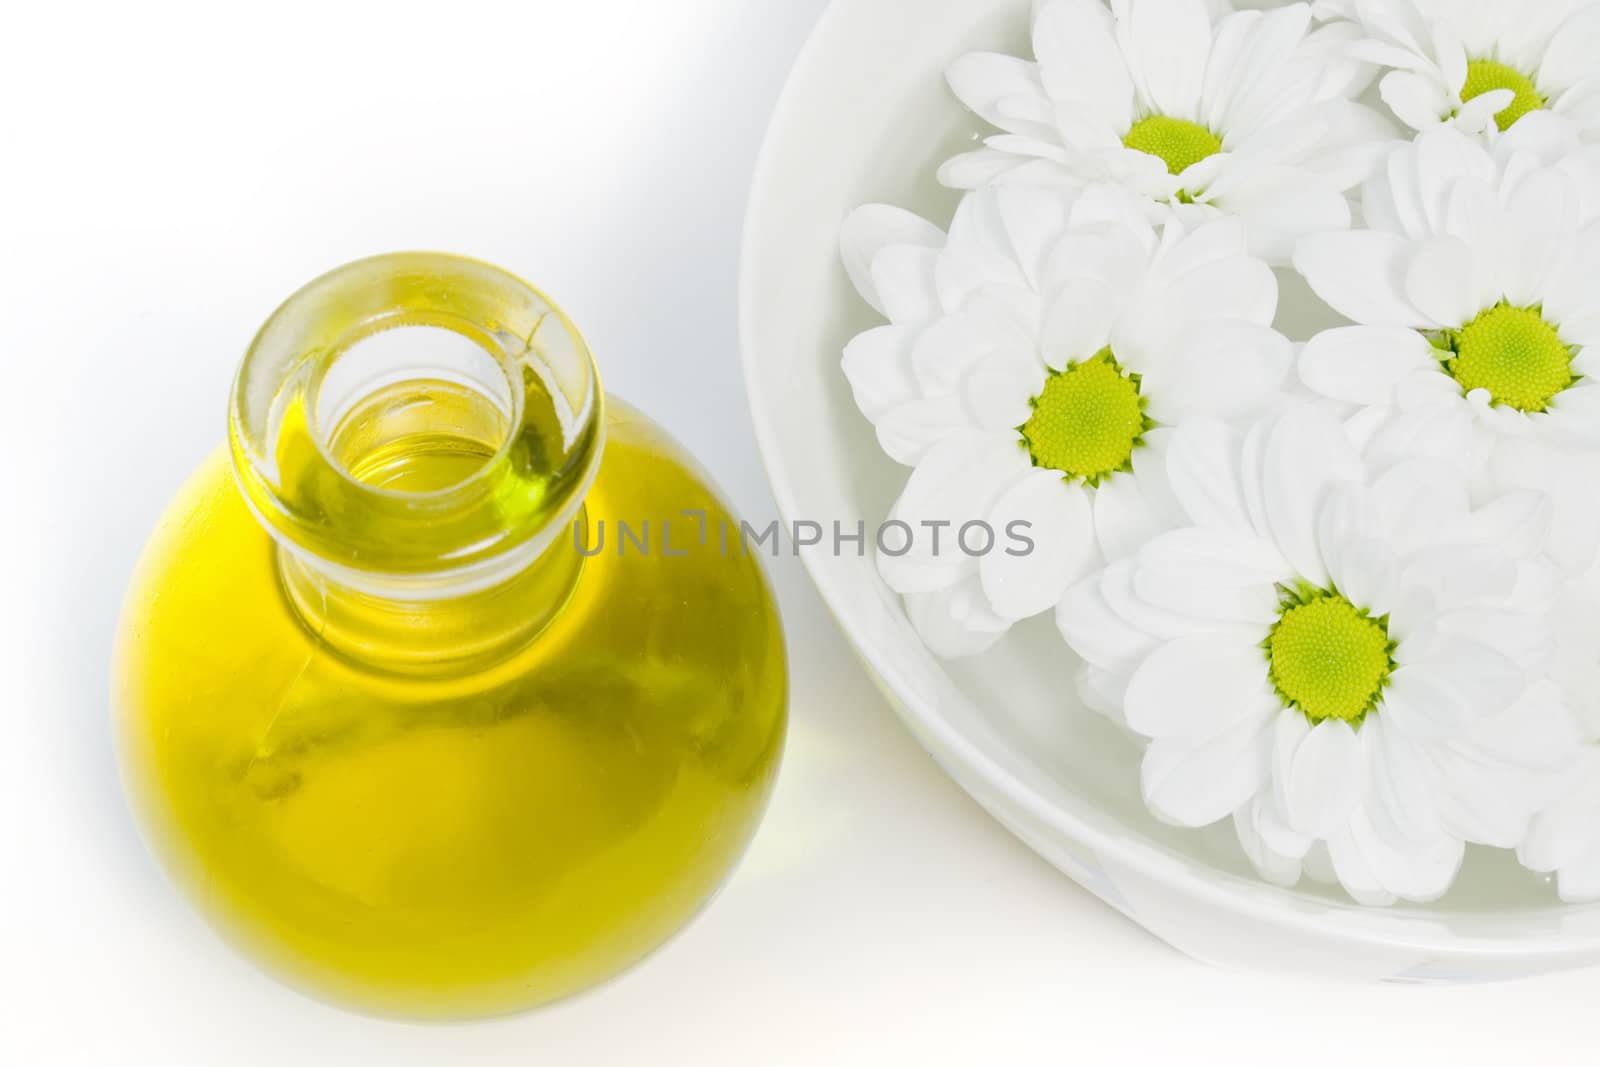 body oil and beautiful white daisies floating in a bowl of water by nubephoto